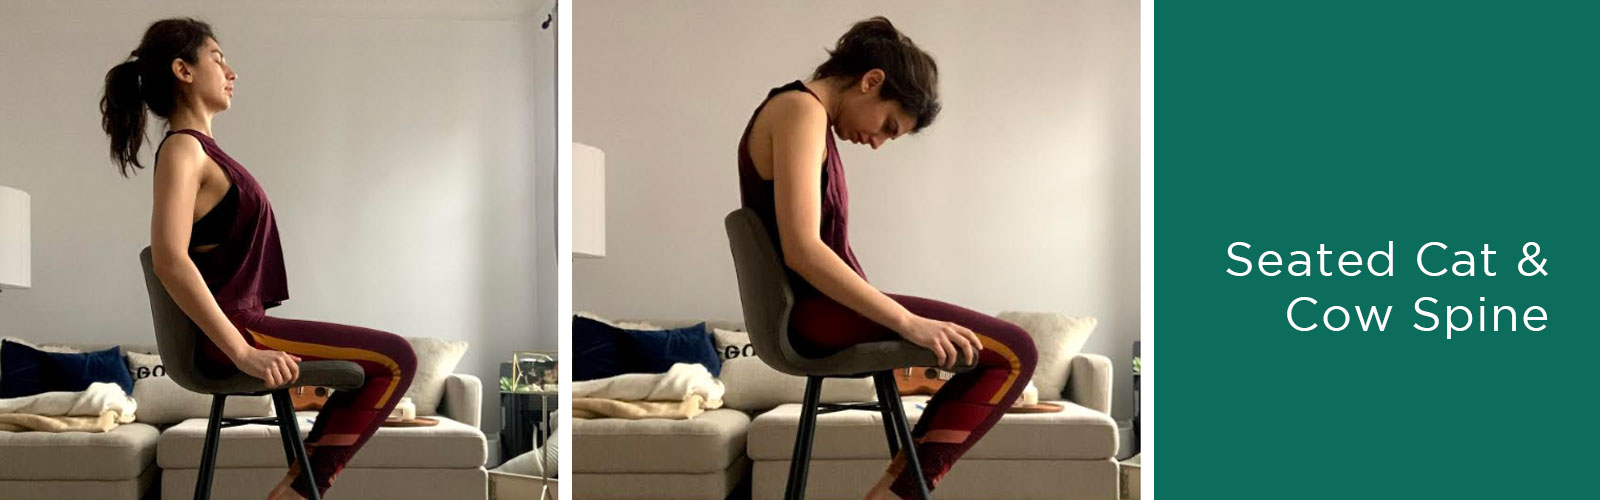 How to do desk yoga seated cat cow spine for sore back and neck